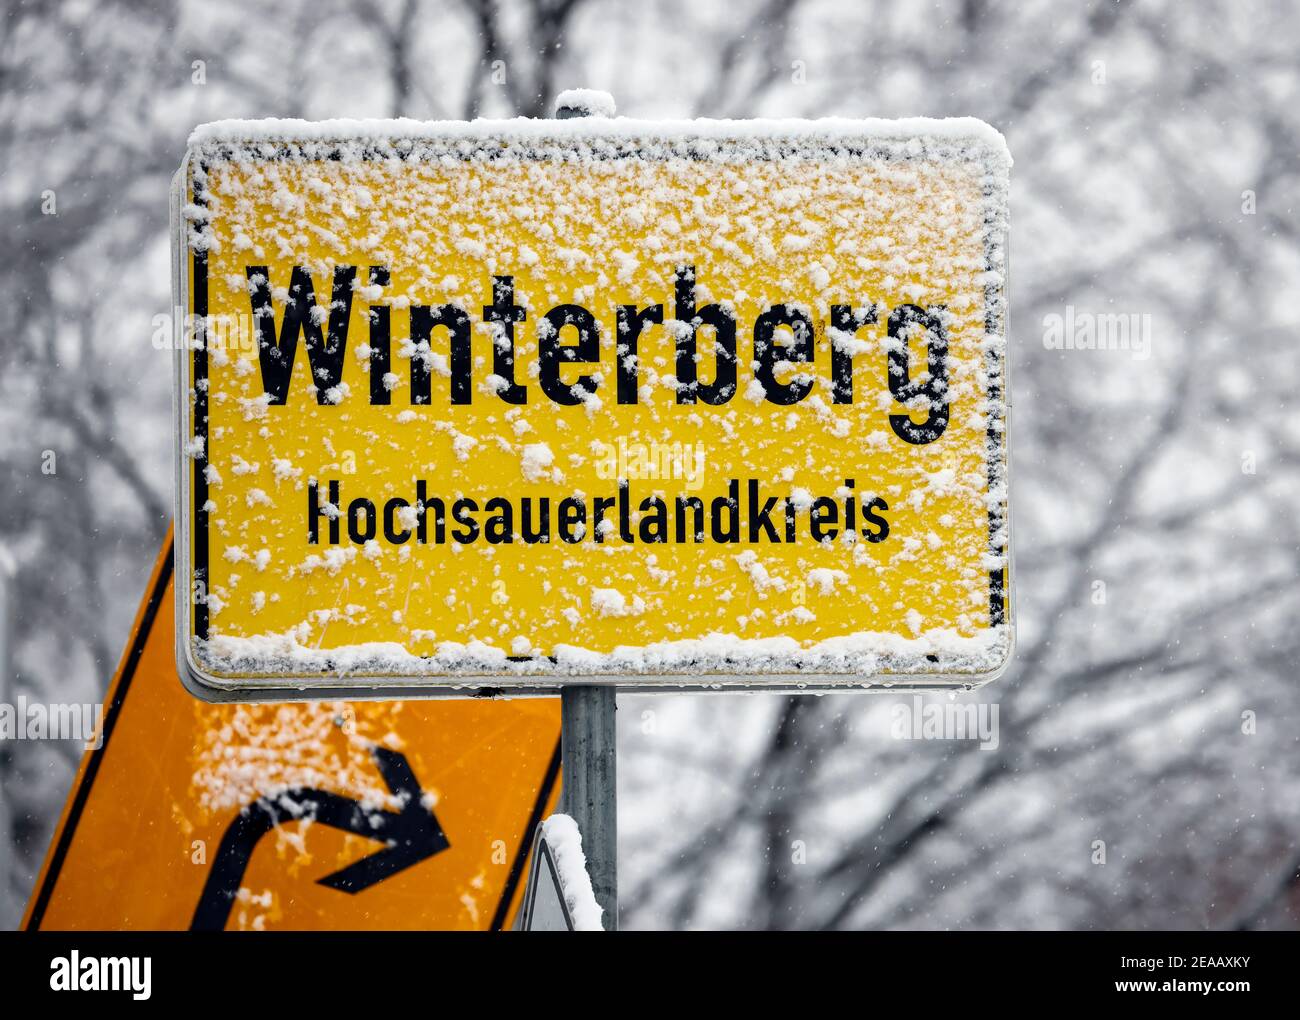 December 7th, 2020, Winterberg, Sauerland, North Rhine-Westphalia, Germany, Snowed-on sign Winterberg, no winter sports in Winterberg during the corona crisis during the second part of the lockdown, ski lifts remain closed in accordance with the new Corona Protection Ordinance in NRW. 00X201207D006CARO Stock Photo